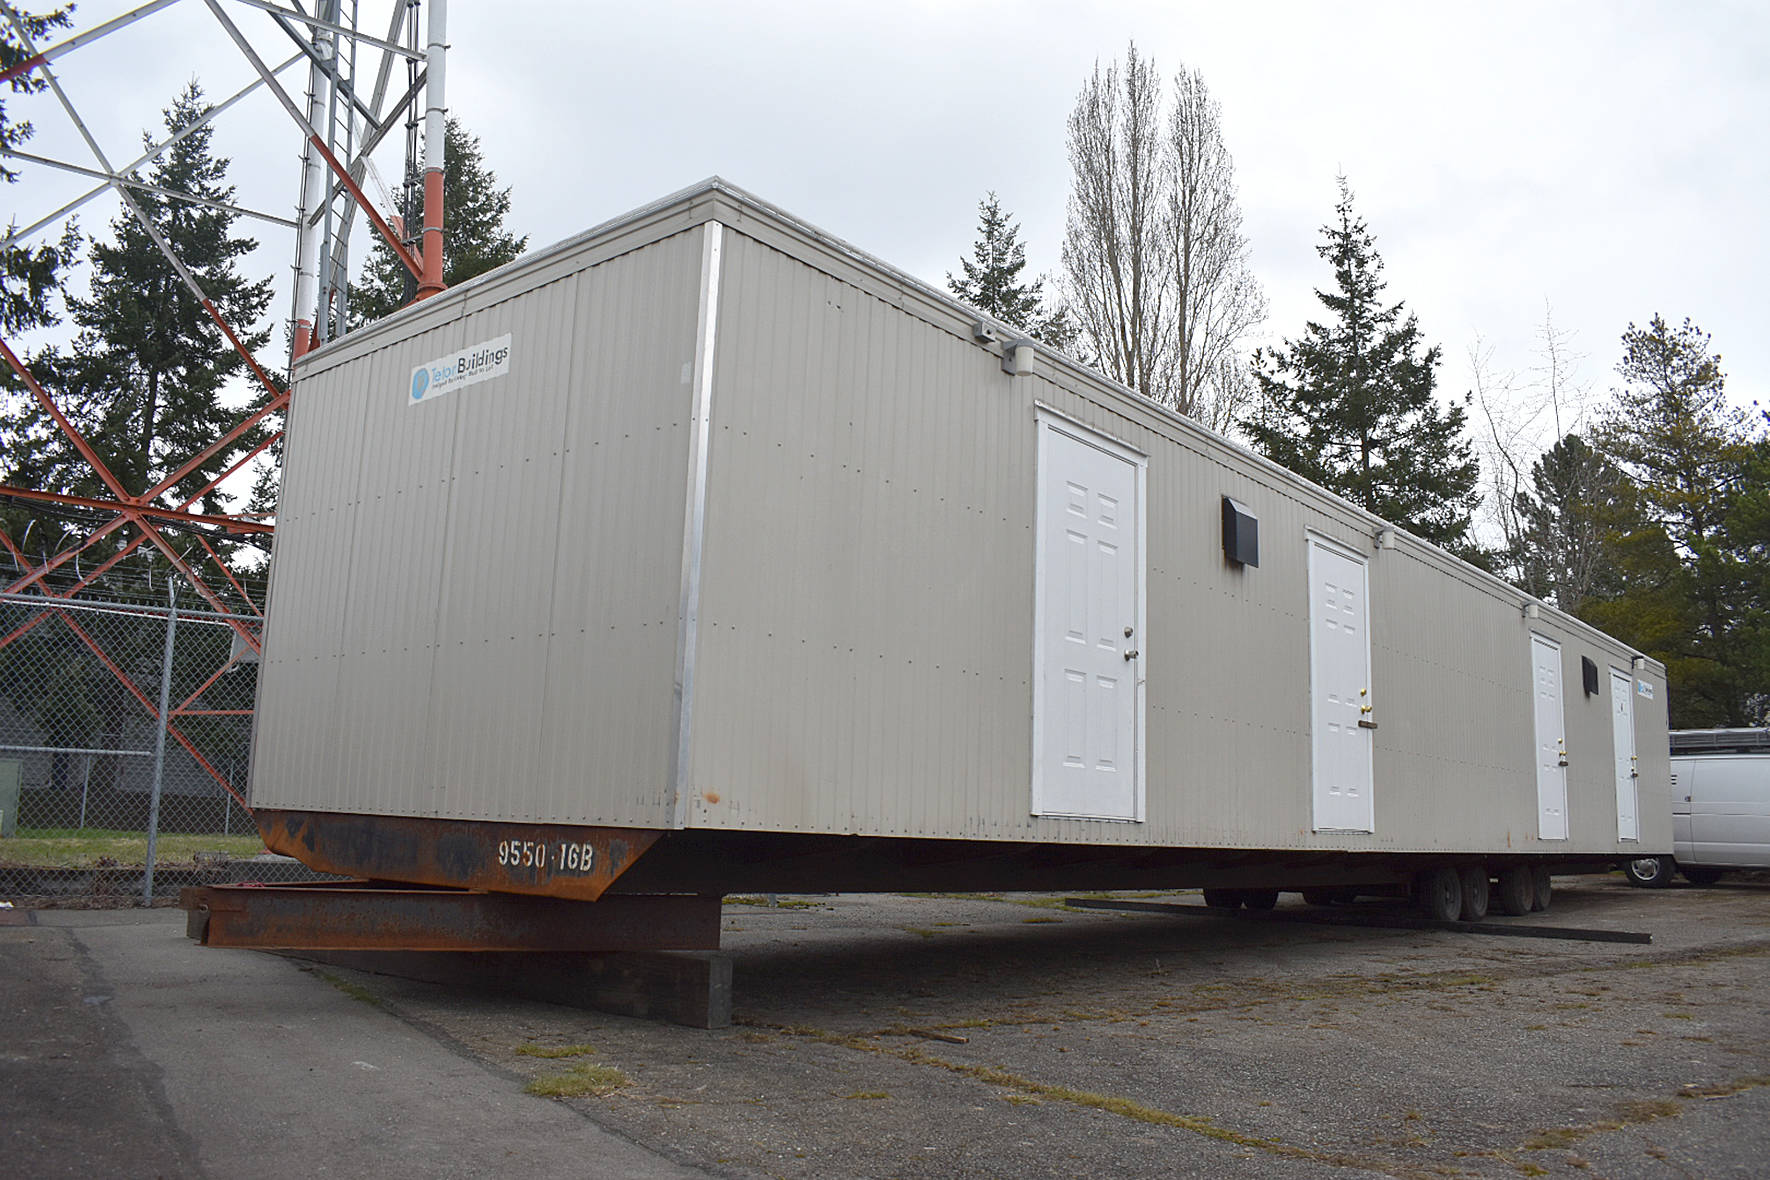 Photo by Haley Ausbun. A preview of the first modular unit being used to house King County residents under quarantine for COVID-19, coronavirus. The units will be located on a county-onward parcel in White Center, where an old office building is planned to be demolished to make space.